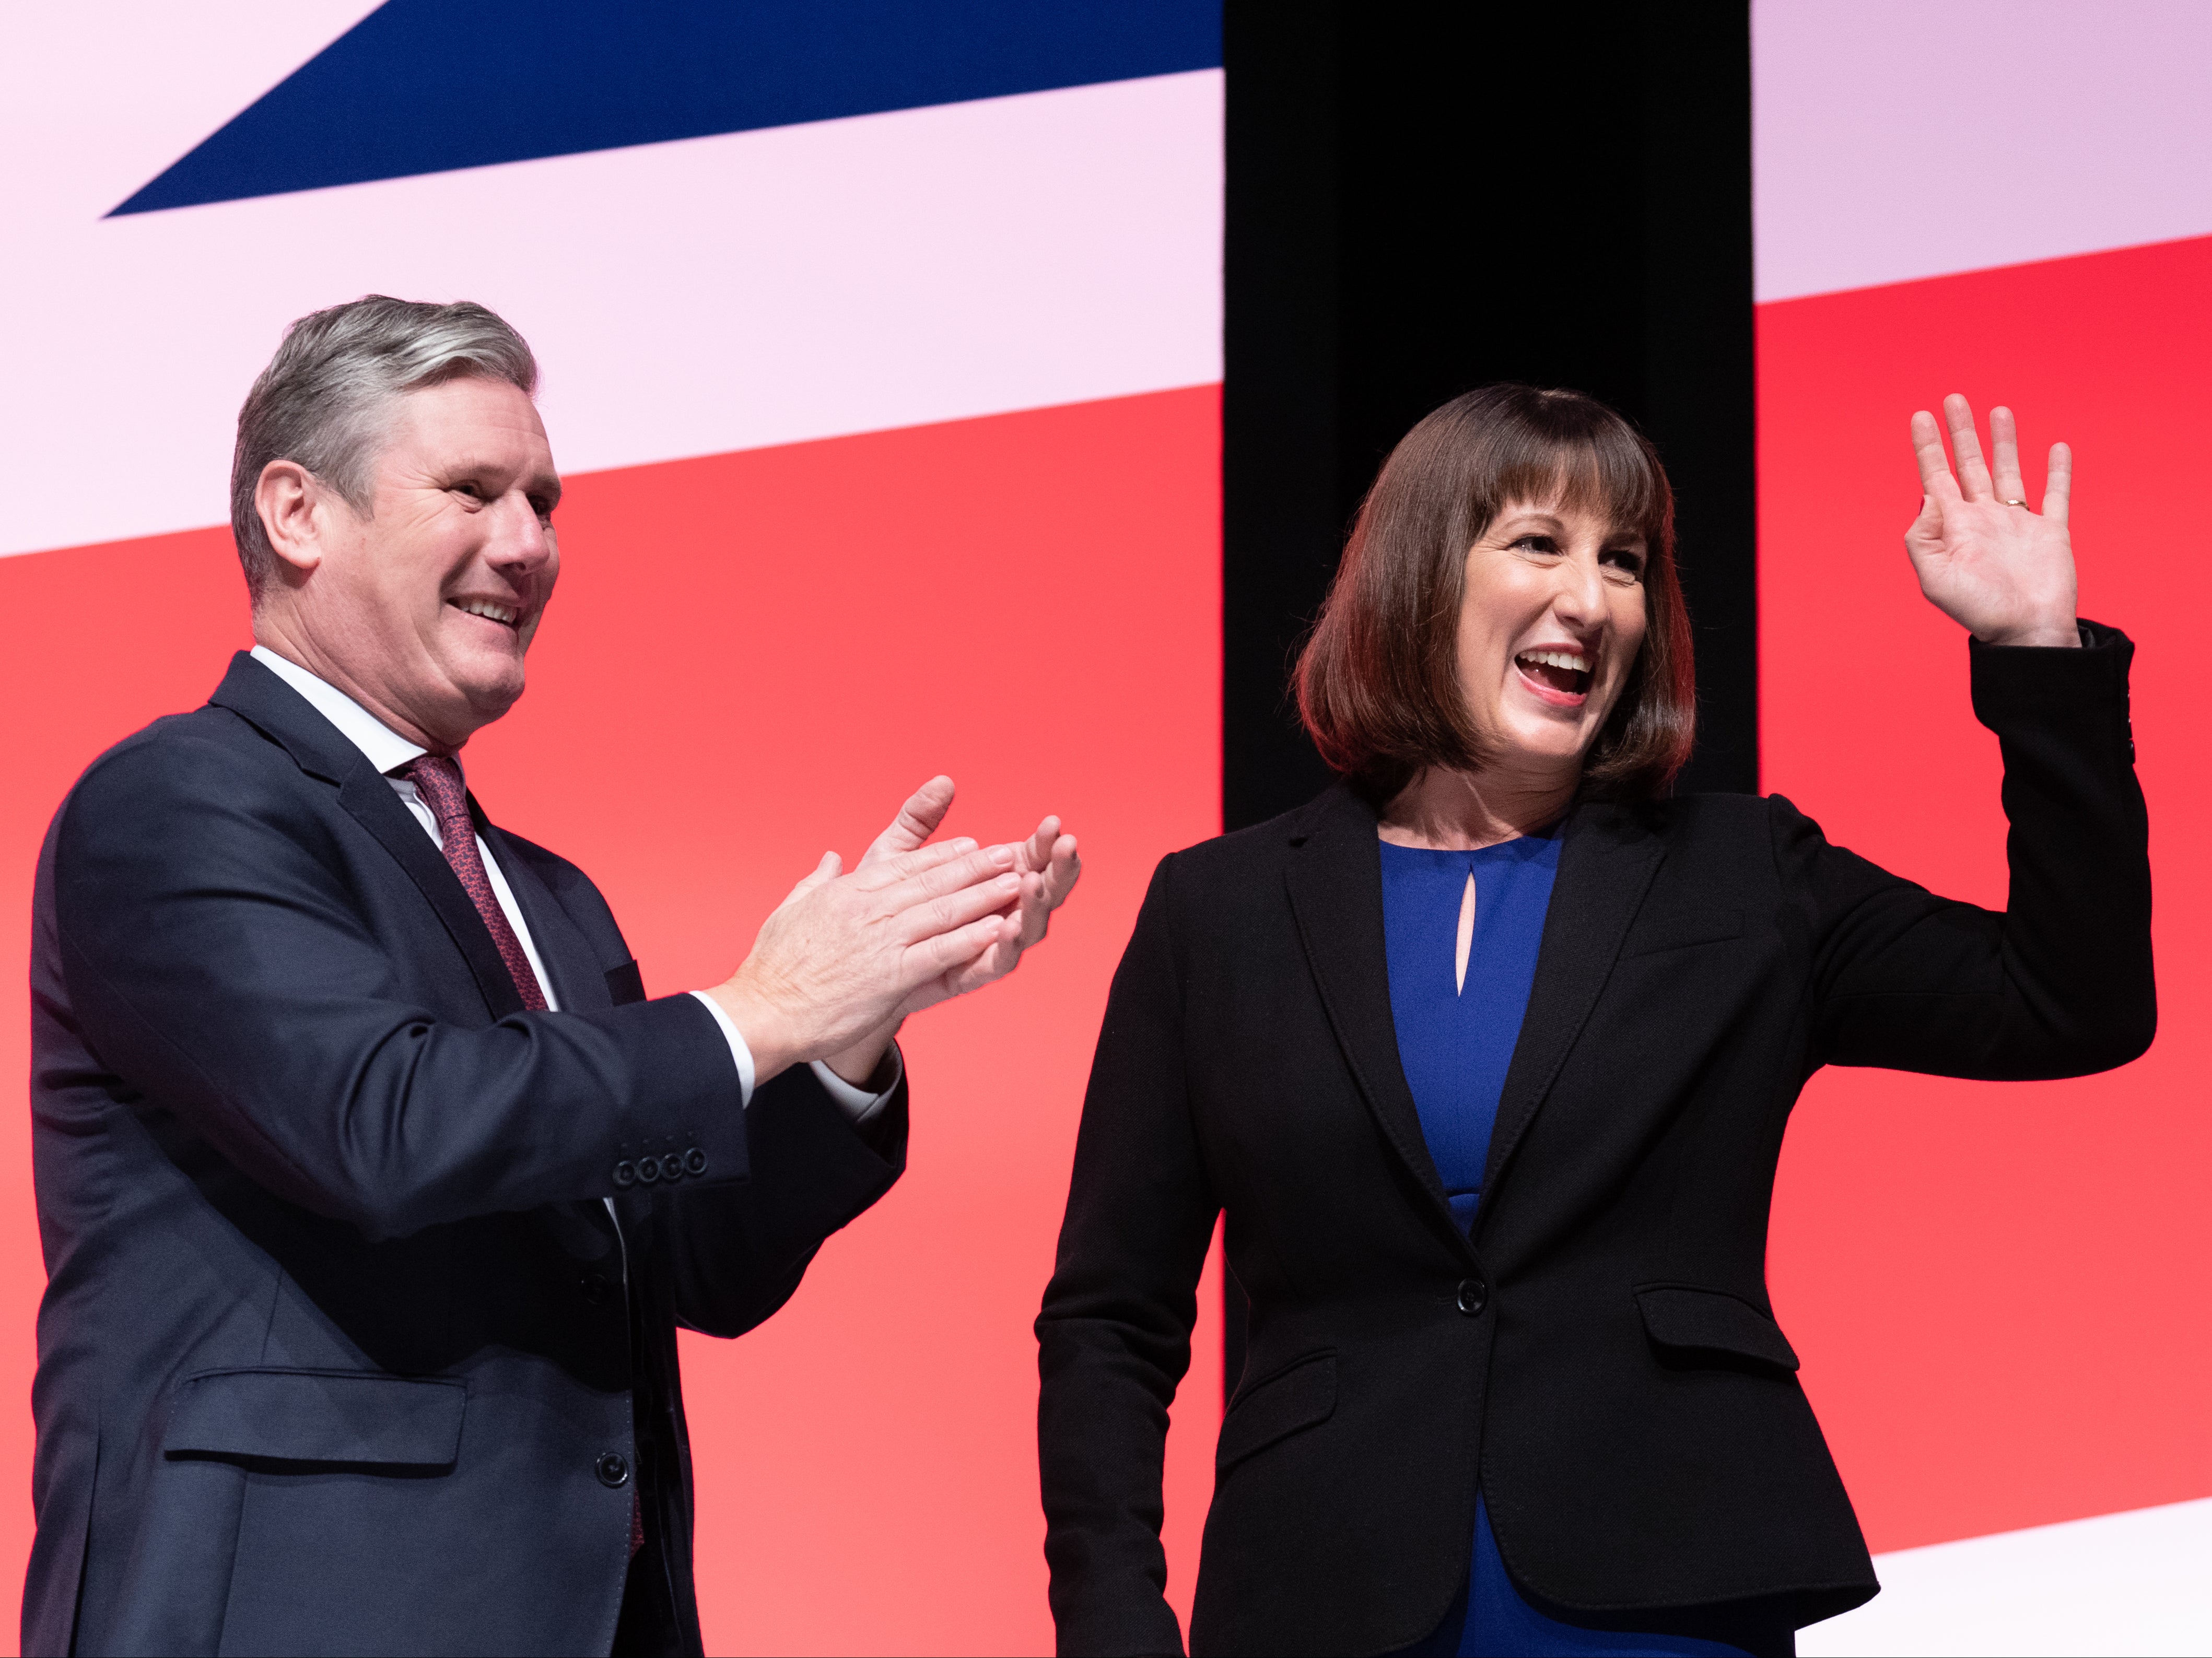 Keir Starmer and Labour’s shadow chancellor Rachel Reeves